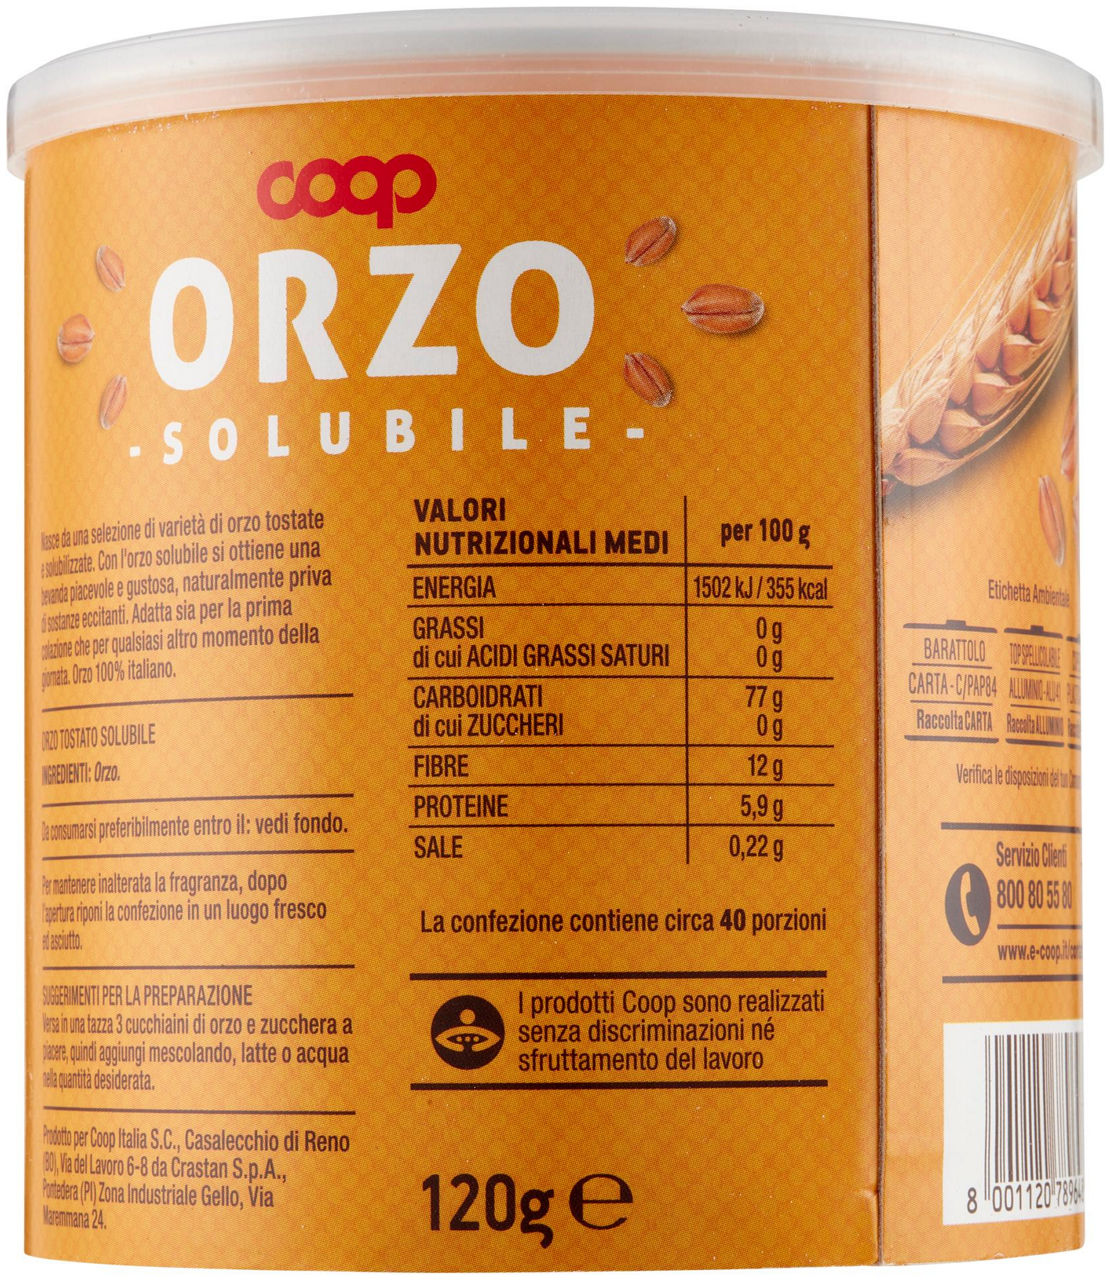 Orzo solubile 120 g - 2